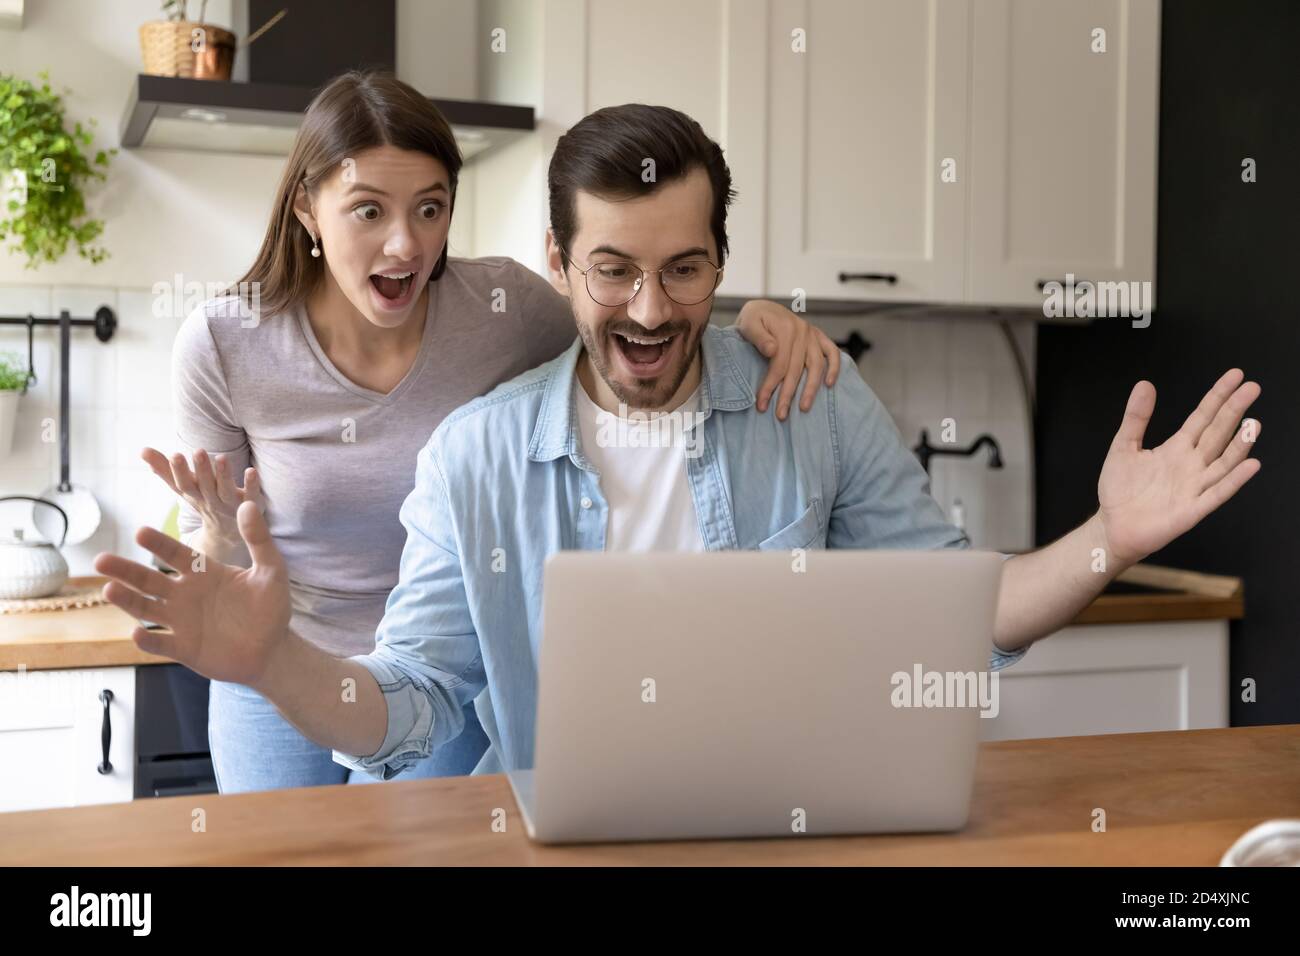 Shocked happy young family couple looking at computer screen. Stock Photo